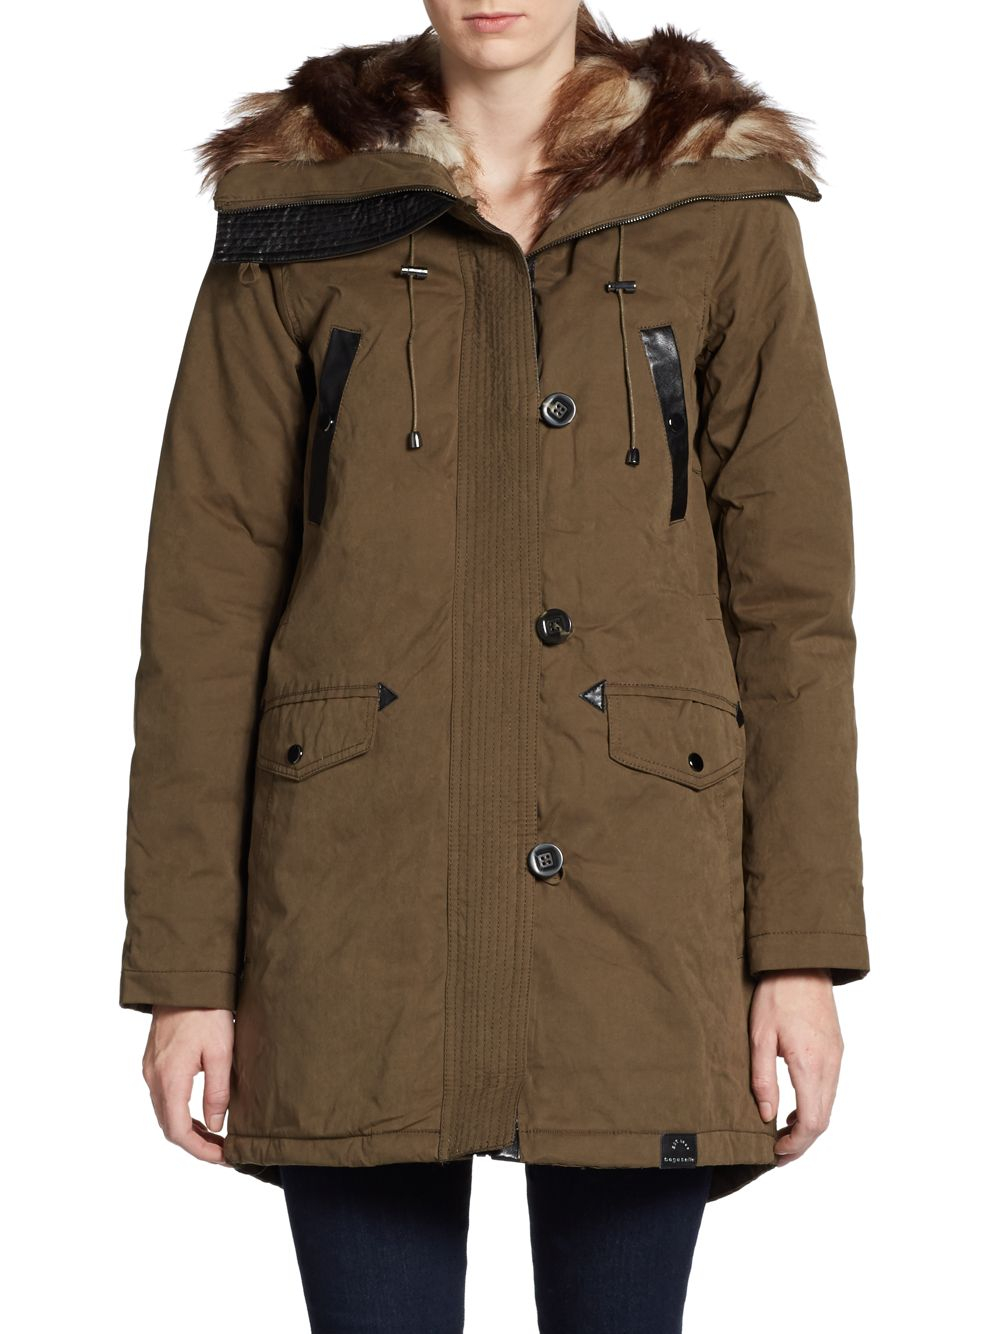 Lyst - Bagatelle Faux Fur-lined Hooded Parka in Brown